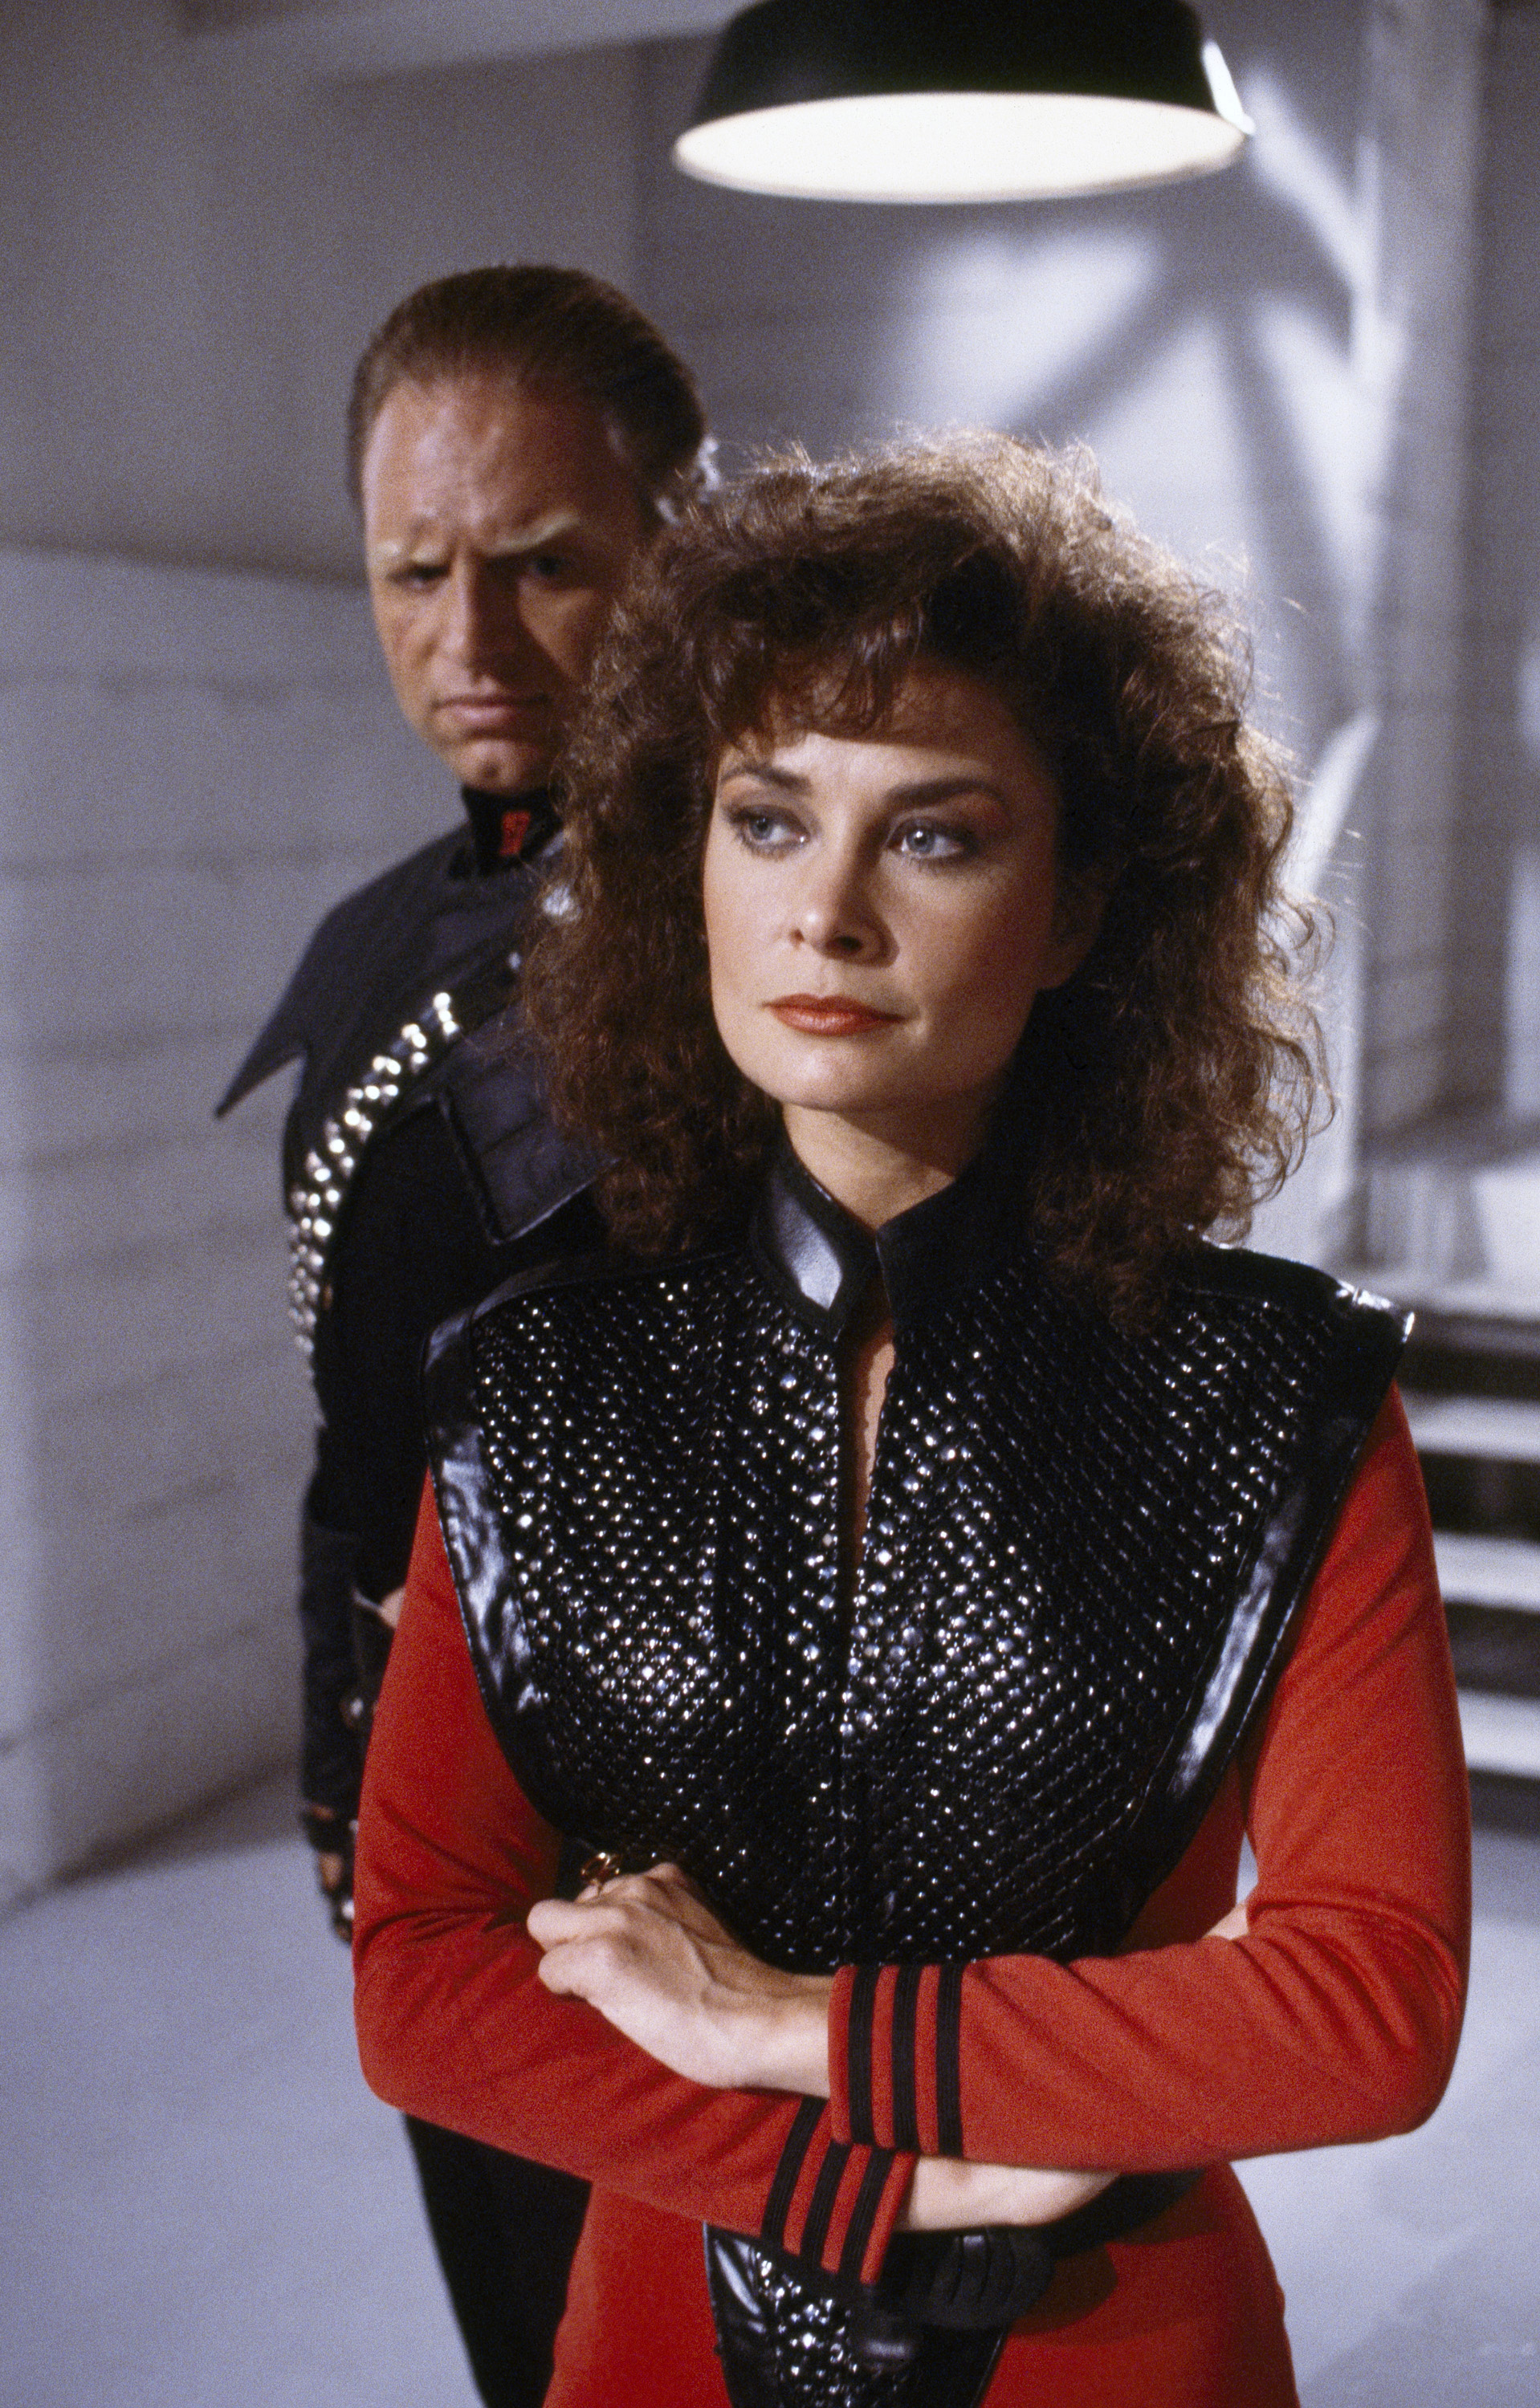 Actor Thomas Callaway as Klaus and Jane Badler as Diana during an episode of 'V,' aired in 1984. | Source: Getty Images